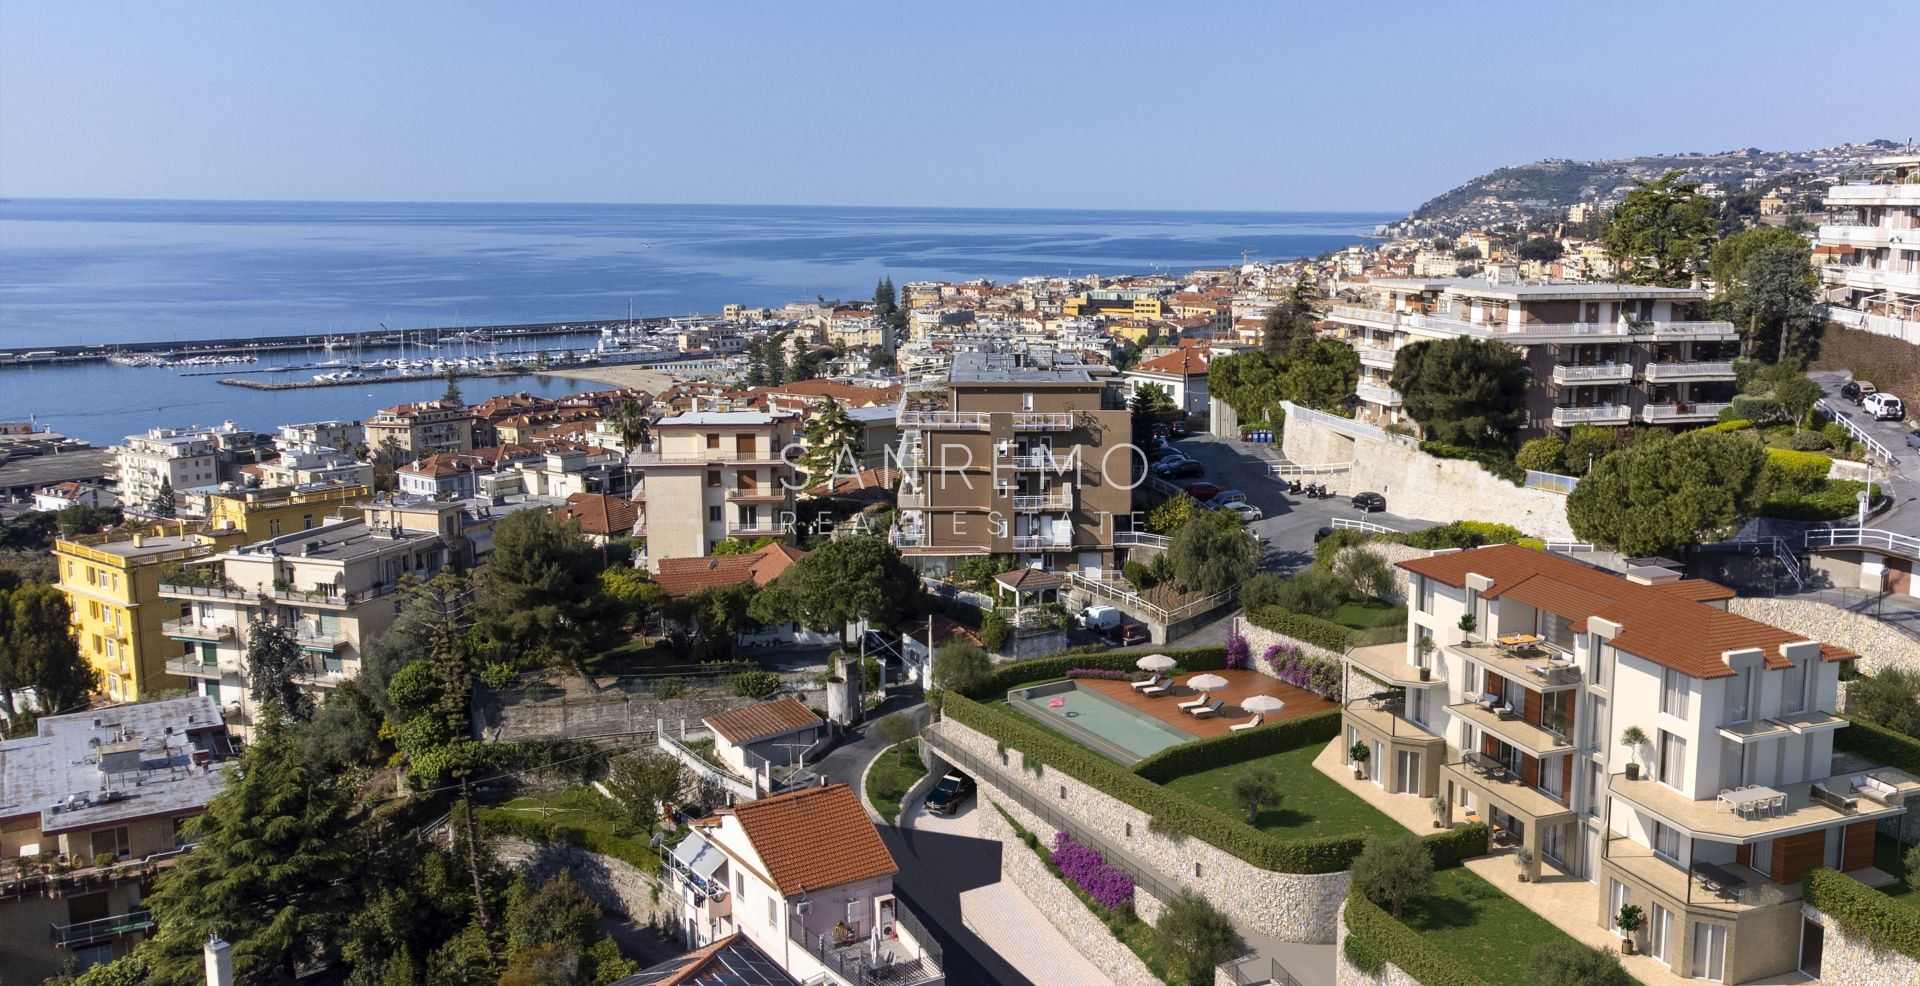 2 room apartment in new exclusive building close to Portosole